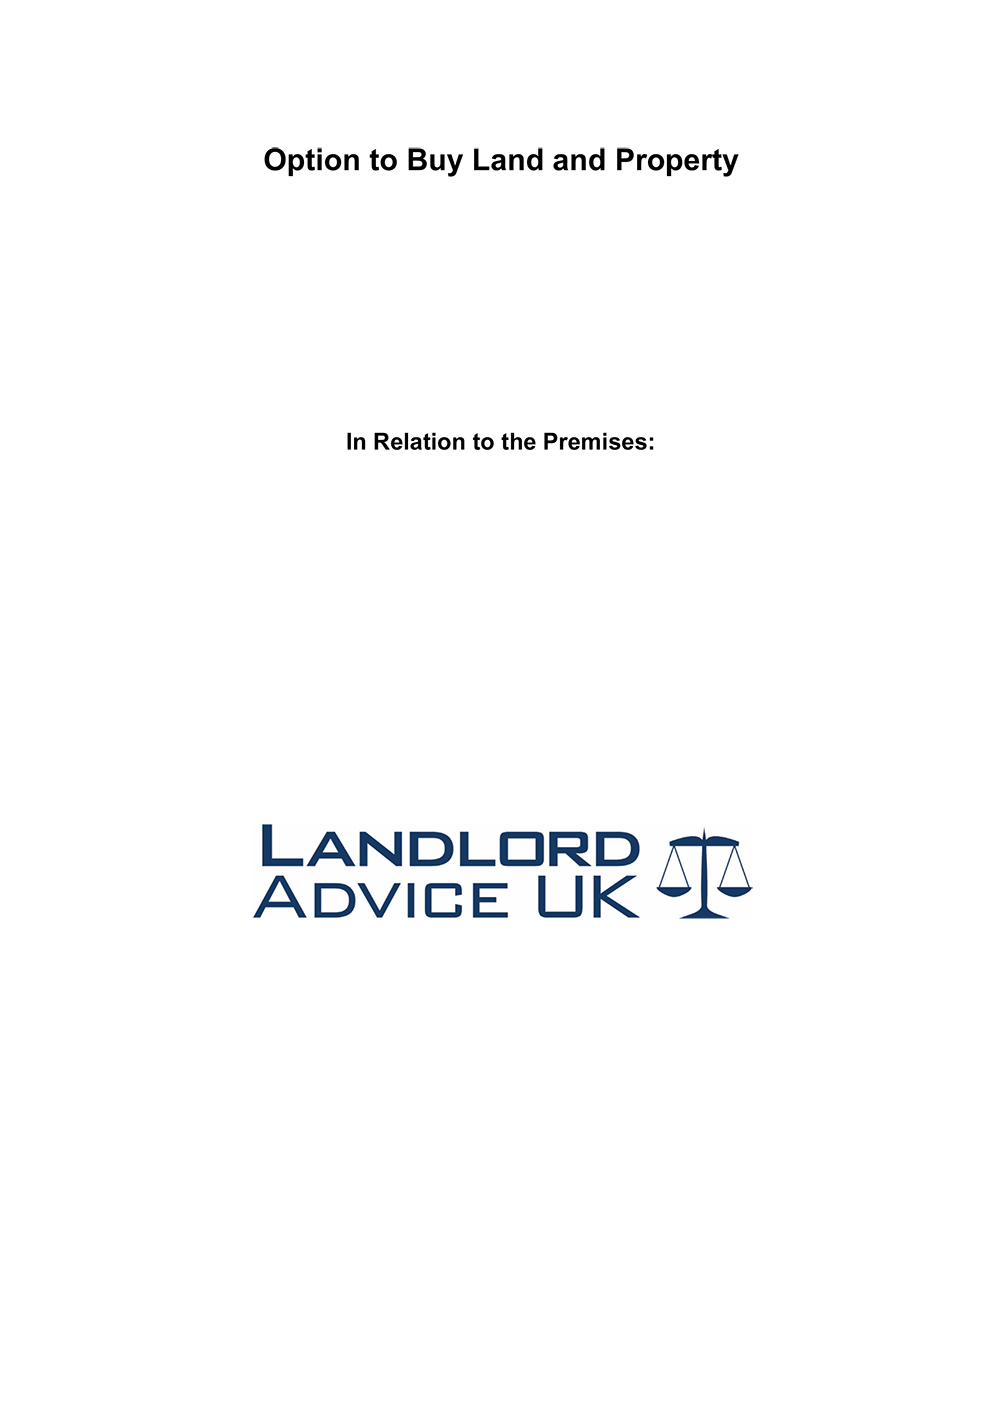 Option to Buy Land or Property – Standard Agreement 1